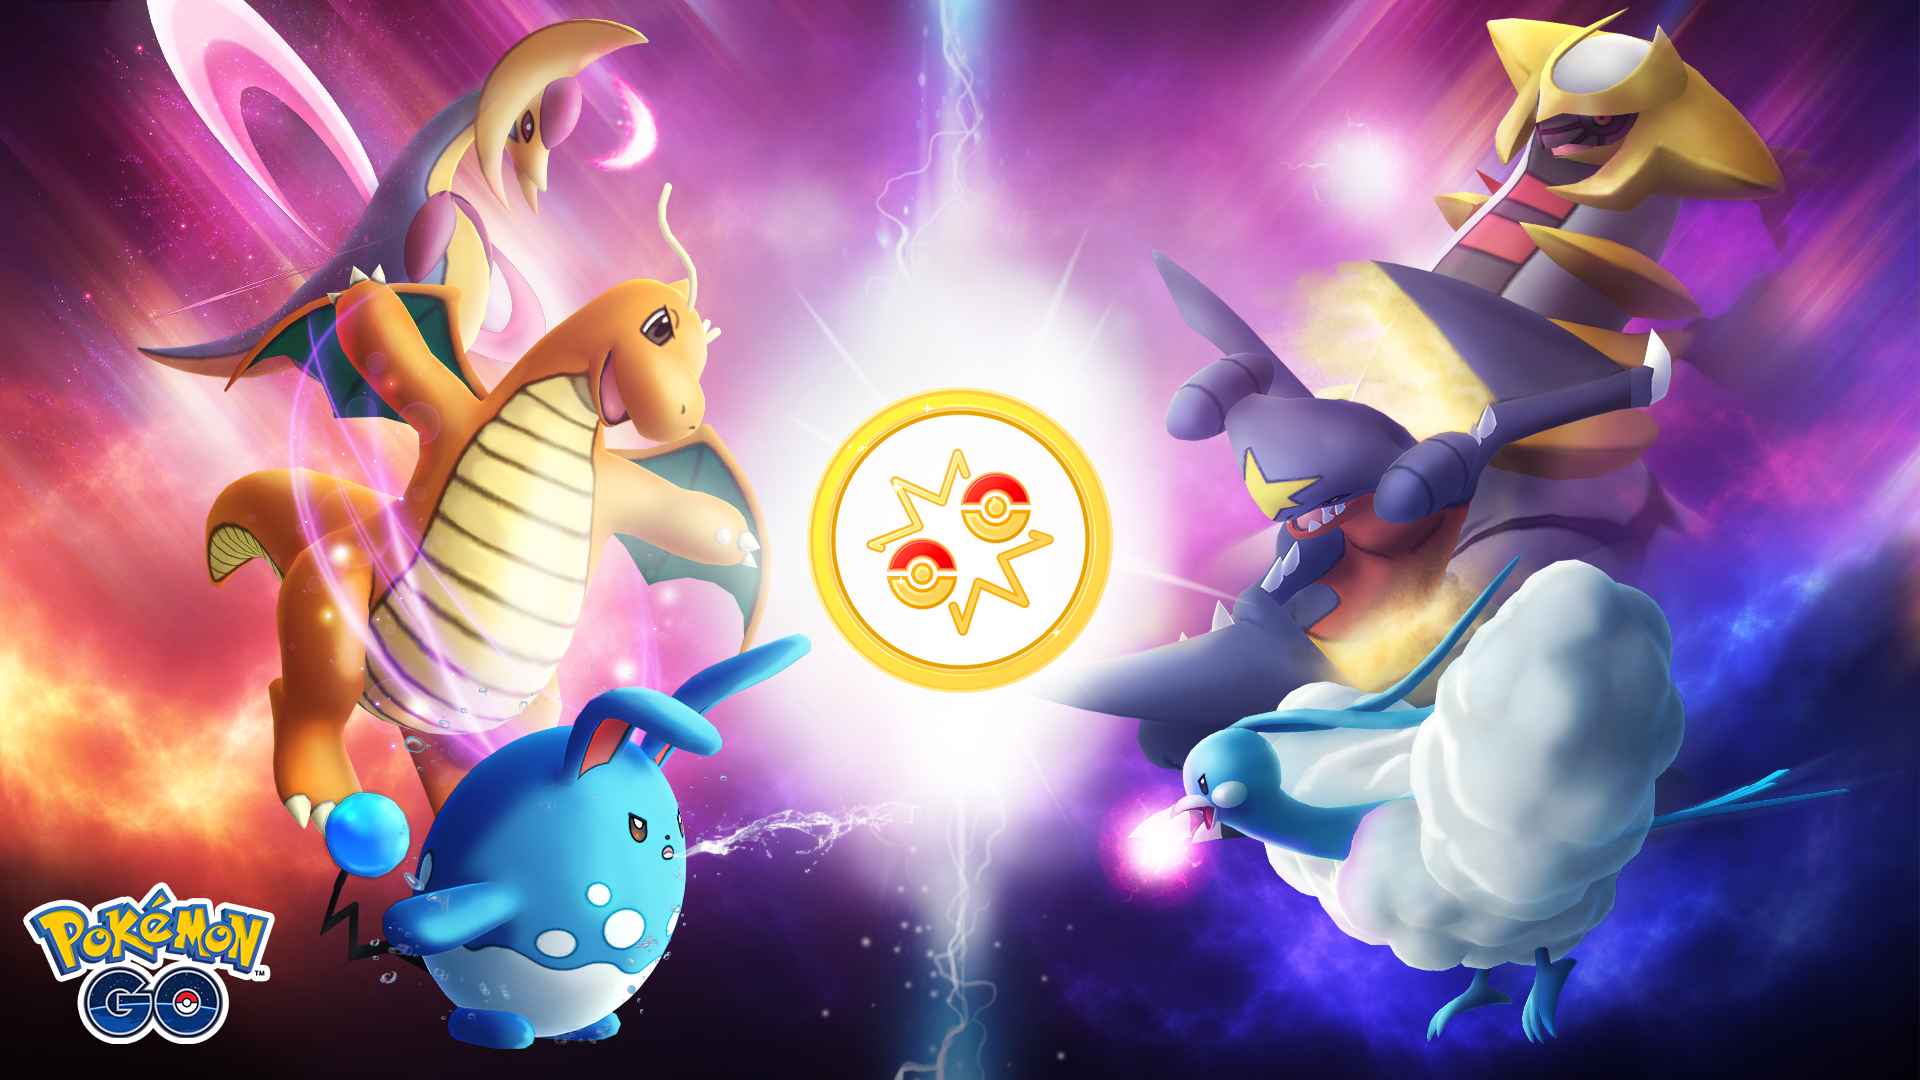 Pokemon Go : All changes & new additions for GO Battle League Season 2